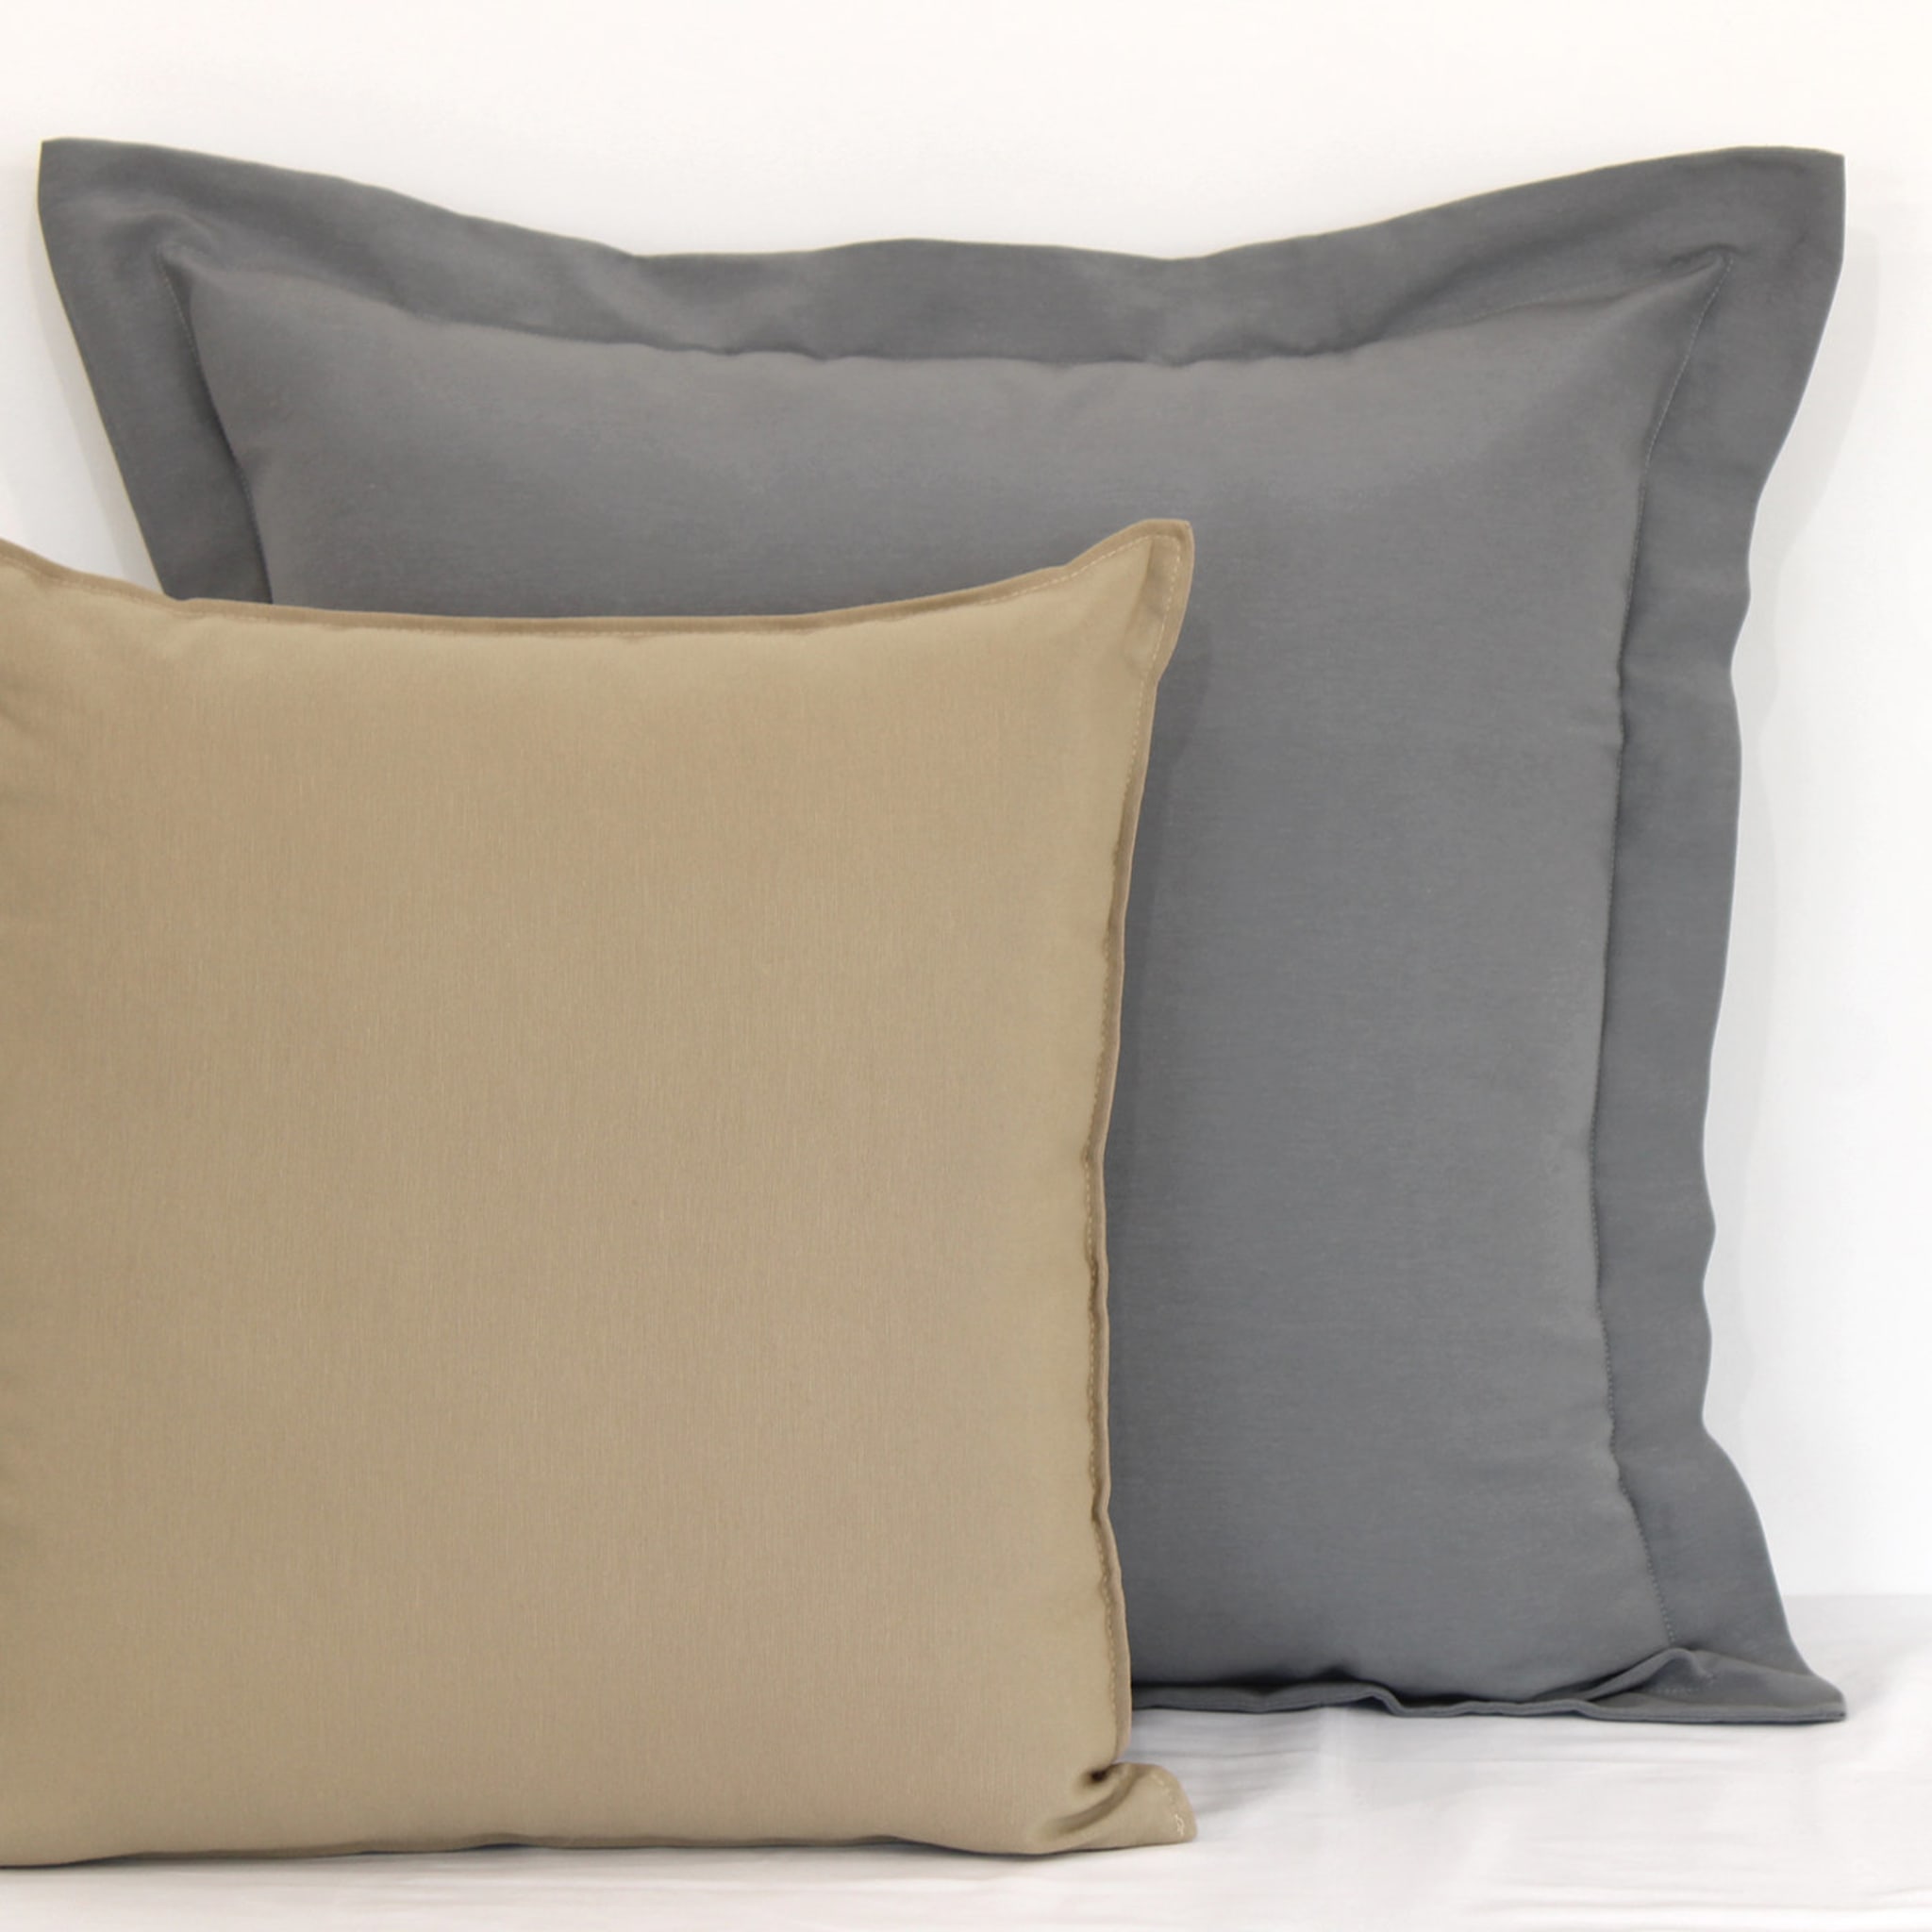 Set of 2 Large Gray Cushions - Alternative view 2